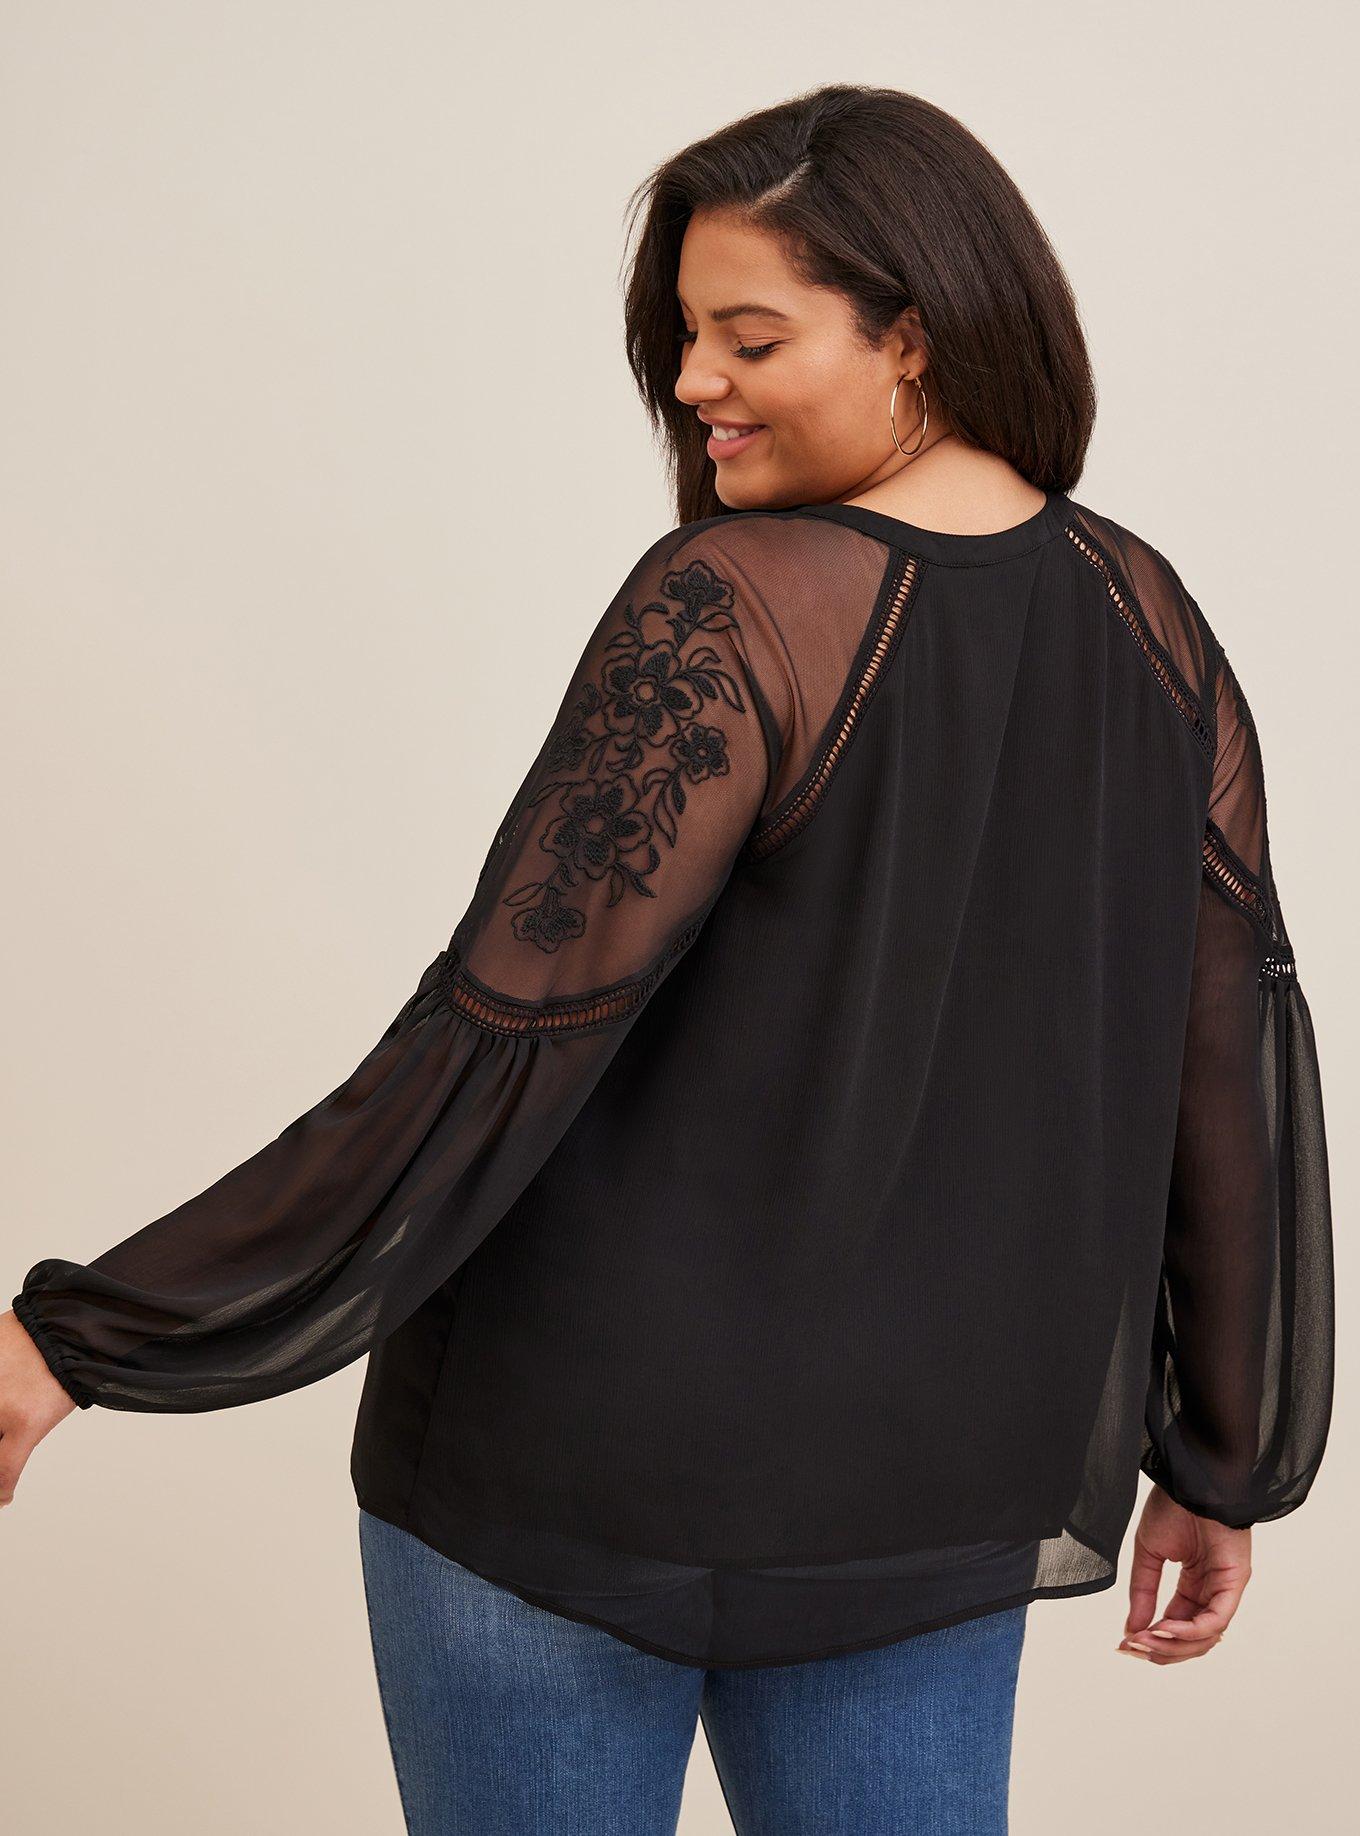 Plus Size - Crinkle Chiffon Embroidered Peasant Top - Torrid